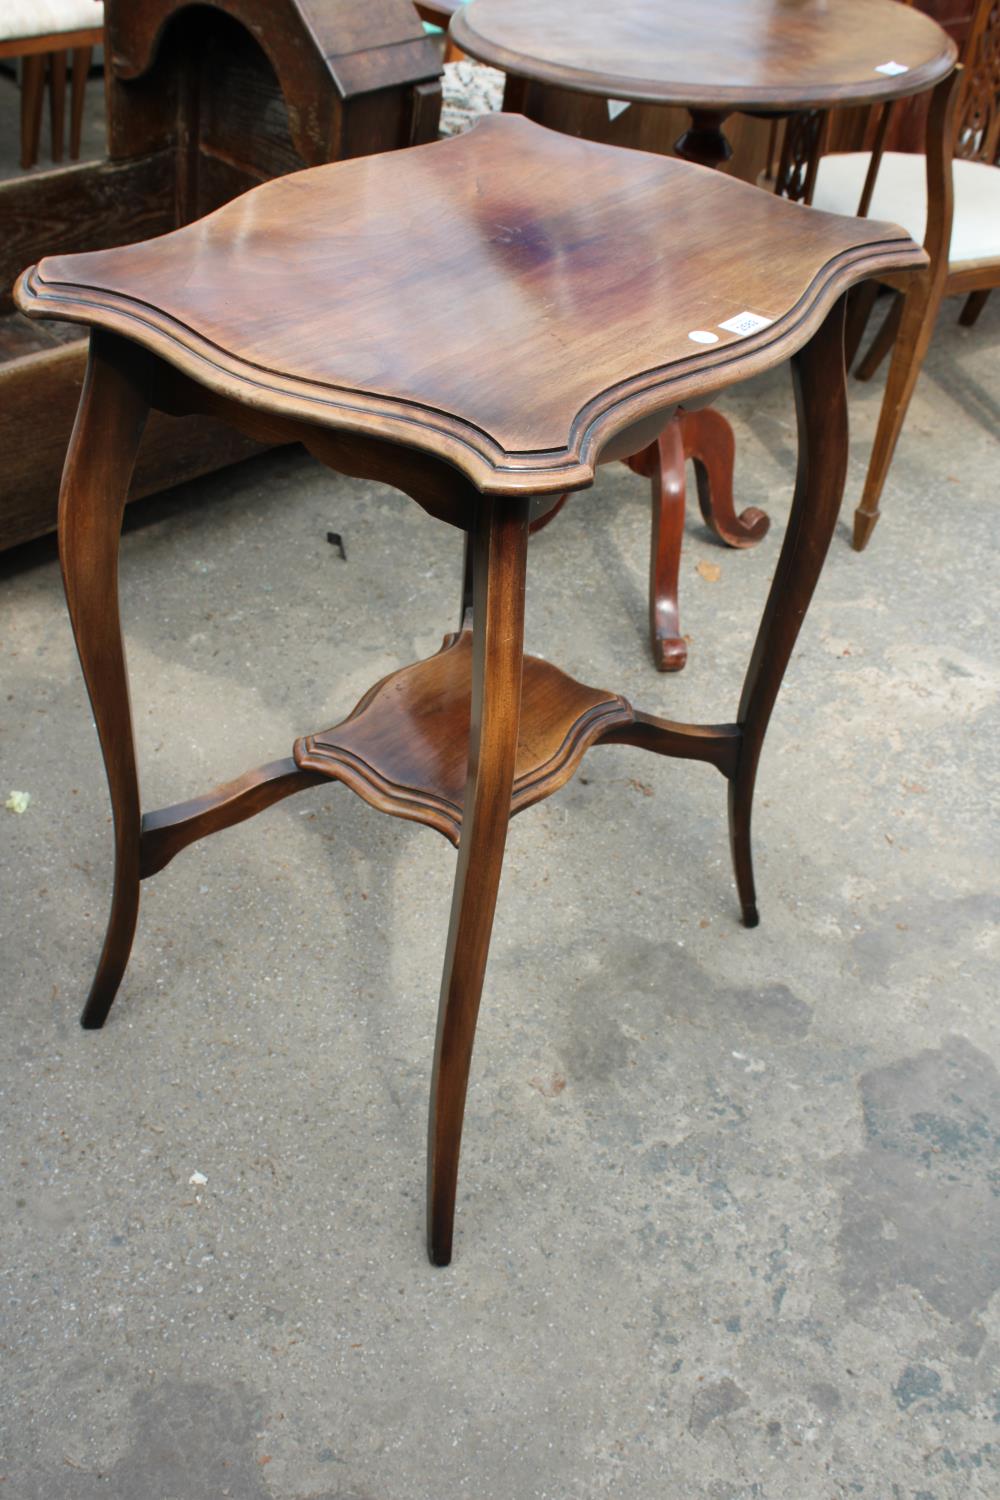 AN EDWARDIAN TWO TIER MAHOGANY OCCASIONAL TABLE, 24" X 18" - Image 2 of 3